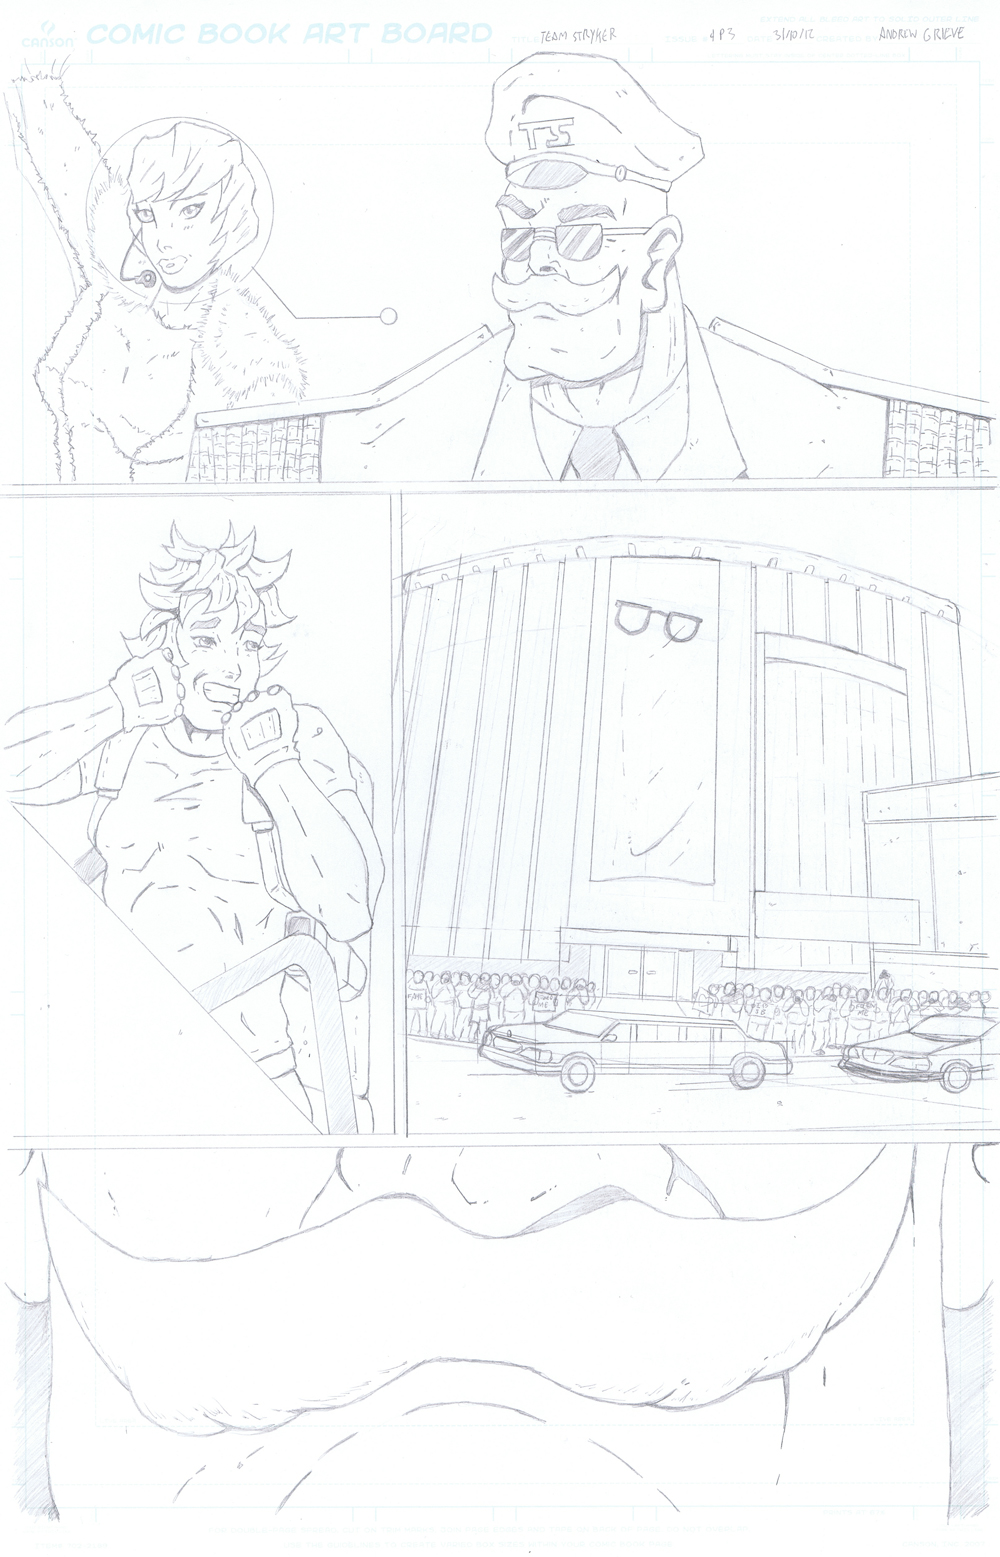 MISSION 004: PAGE 03 PENCIL